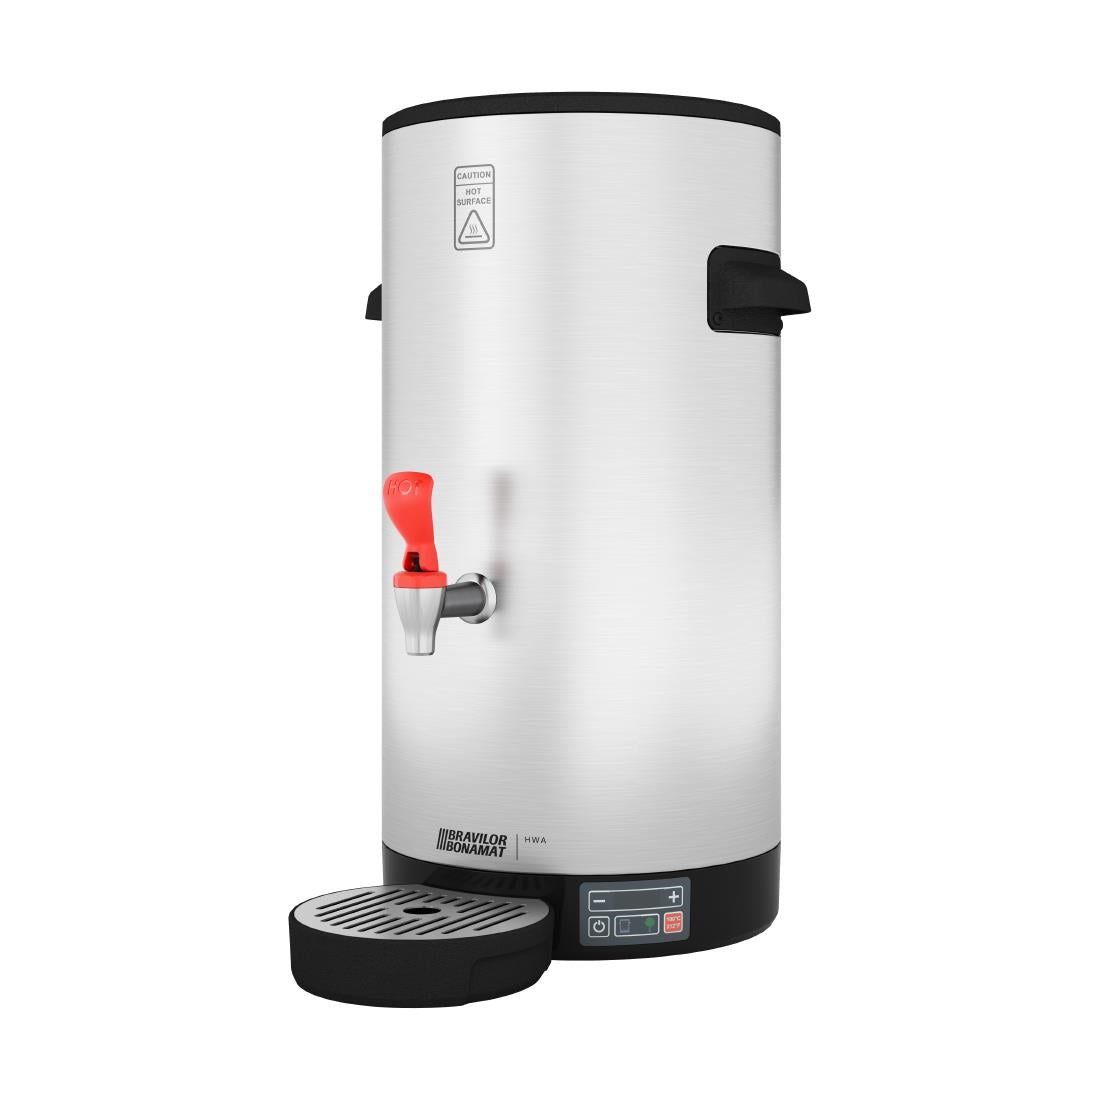 CH312 Bravilor Eco Hot Water Boiler HWA 12 JD Catering Equipment Solutions Ltd